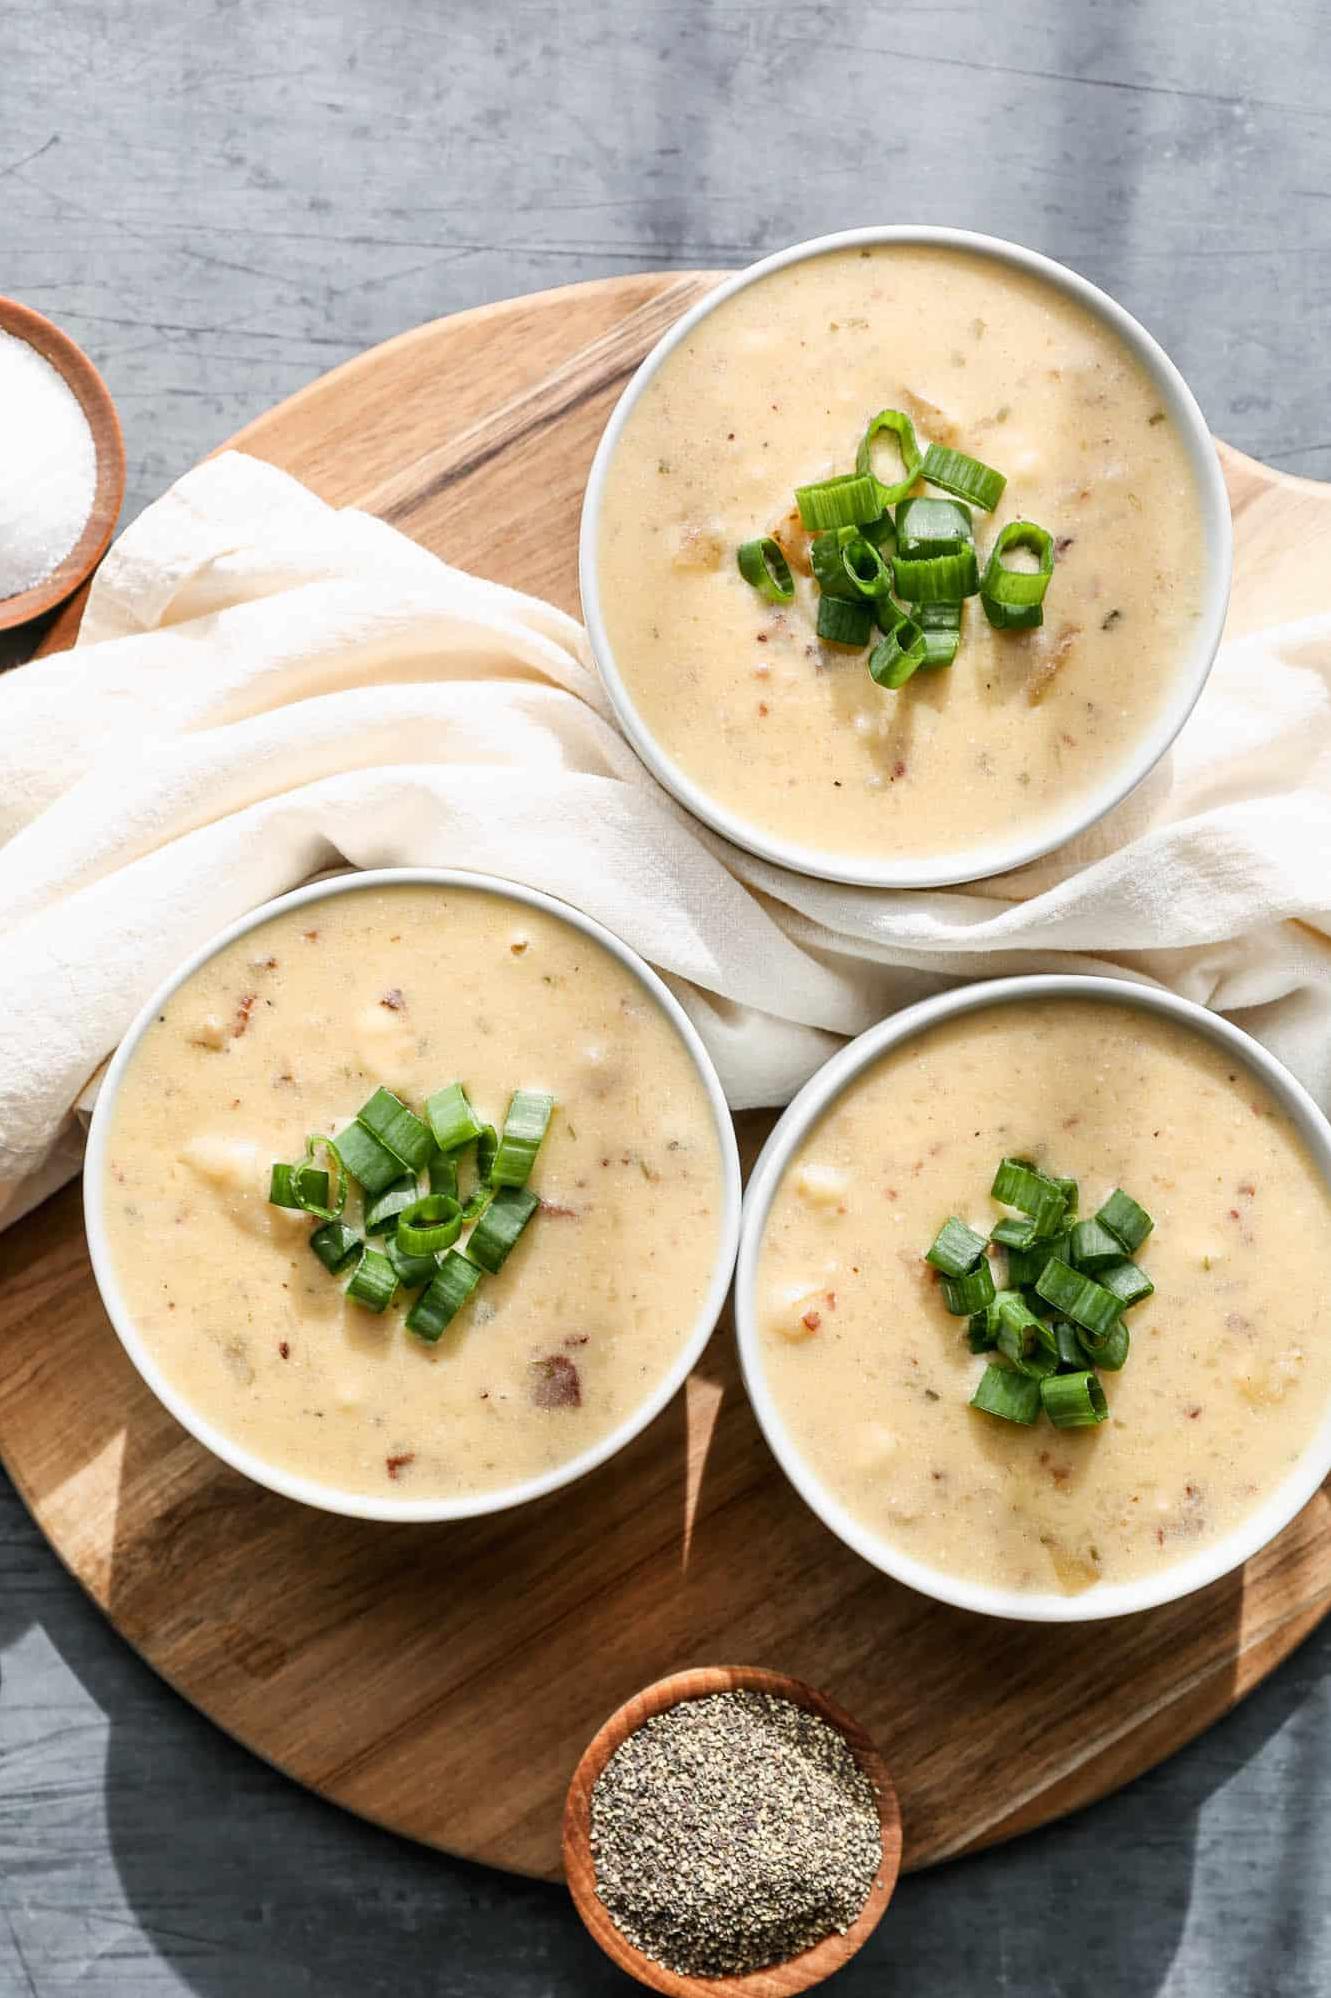  Cozy up with a bowl of this comforting soup on a chilly day.